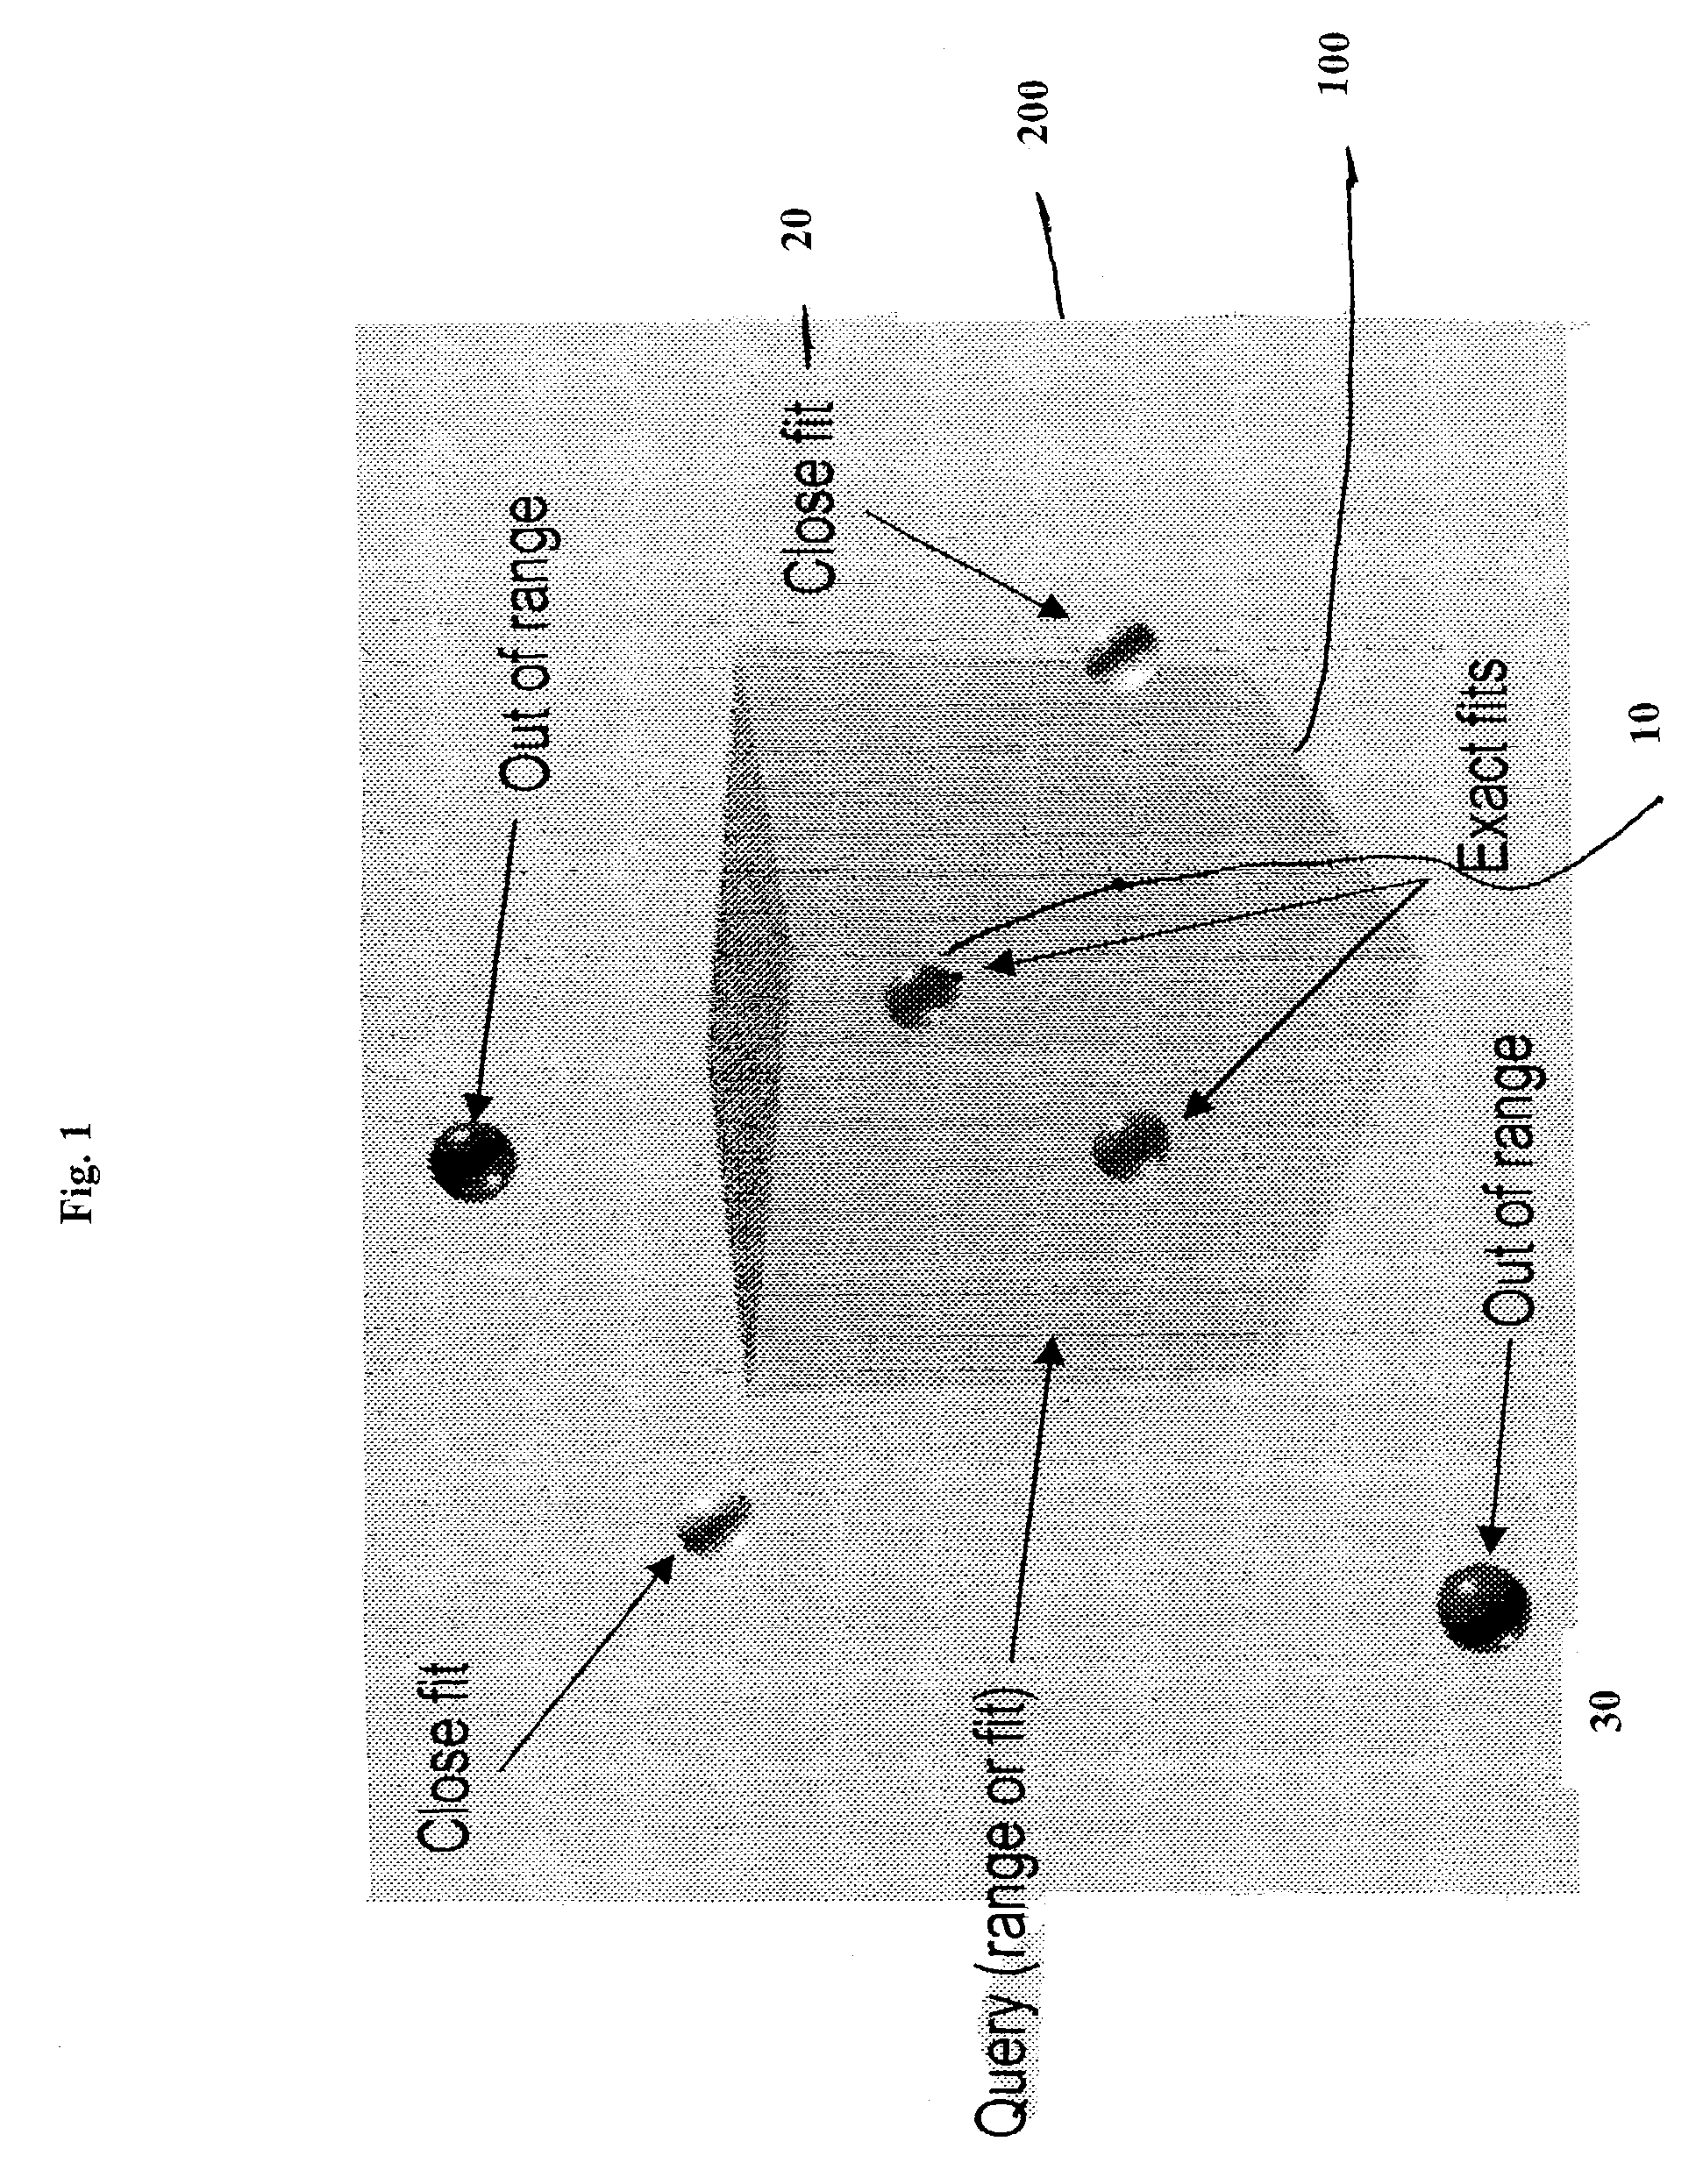 Method and system for approximate matching of data records